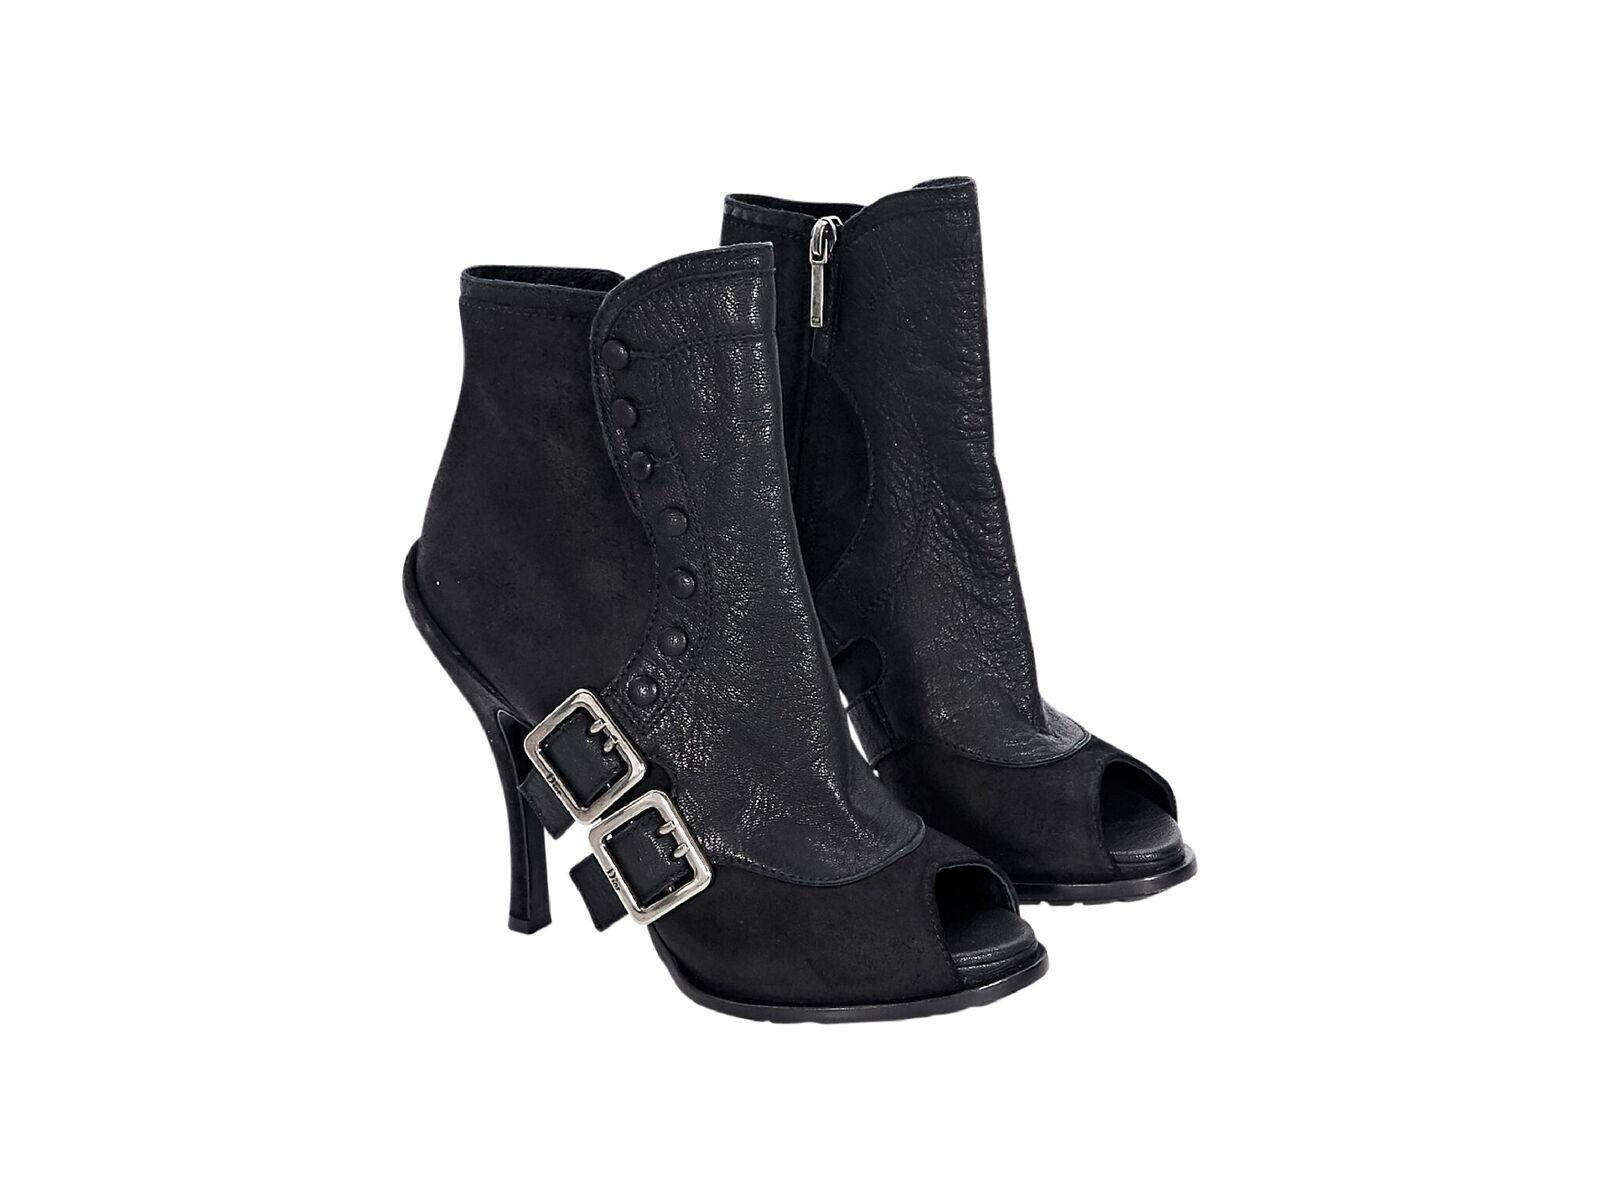 Product details:  Black leather ankle boots by Christian Dior.  Accented with double buckle accents.  Inner zip closure.  Open toe.  Silvertone hardware.  EU size 38.5.  5.5